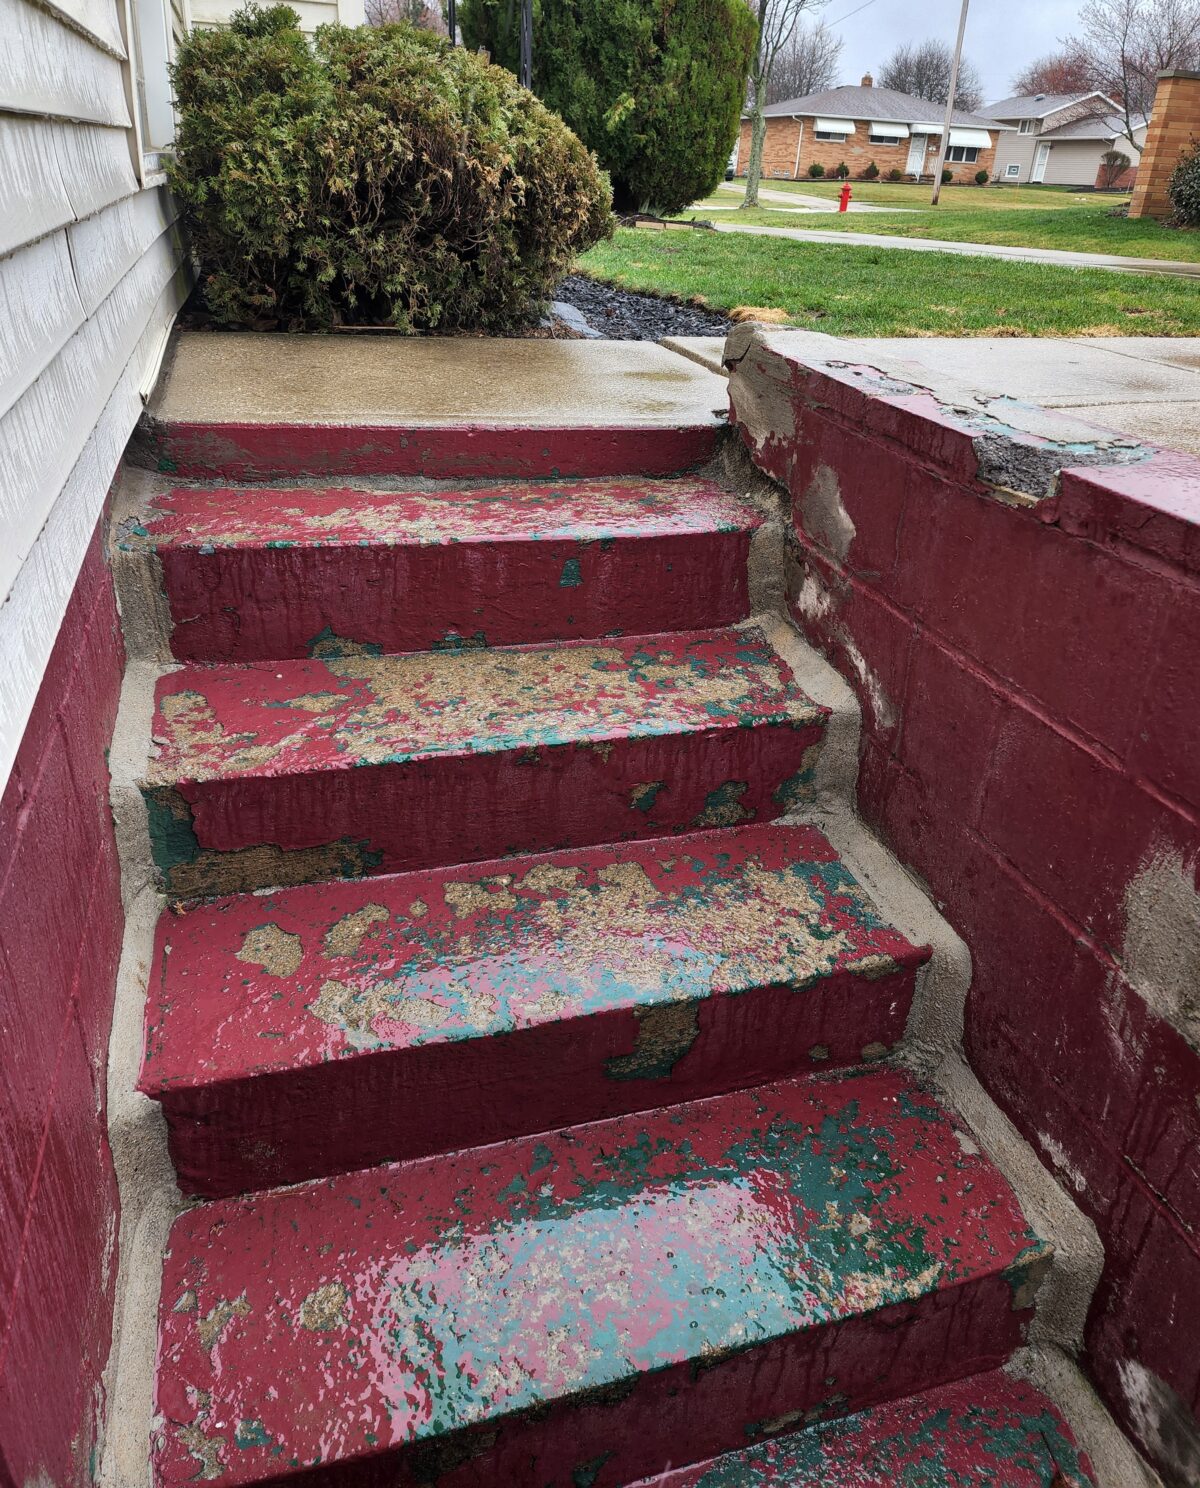 There’s a better way to revitalize these steps and add color to concrete. Beware of painting concrete, as it presents a dangerous slip hazard. (Courtesy of Tim Carter/TNS)